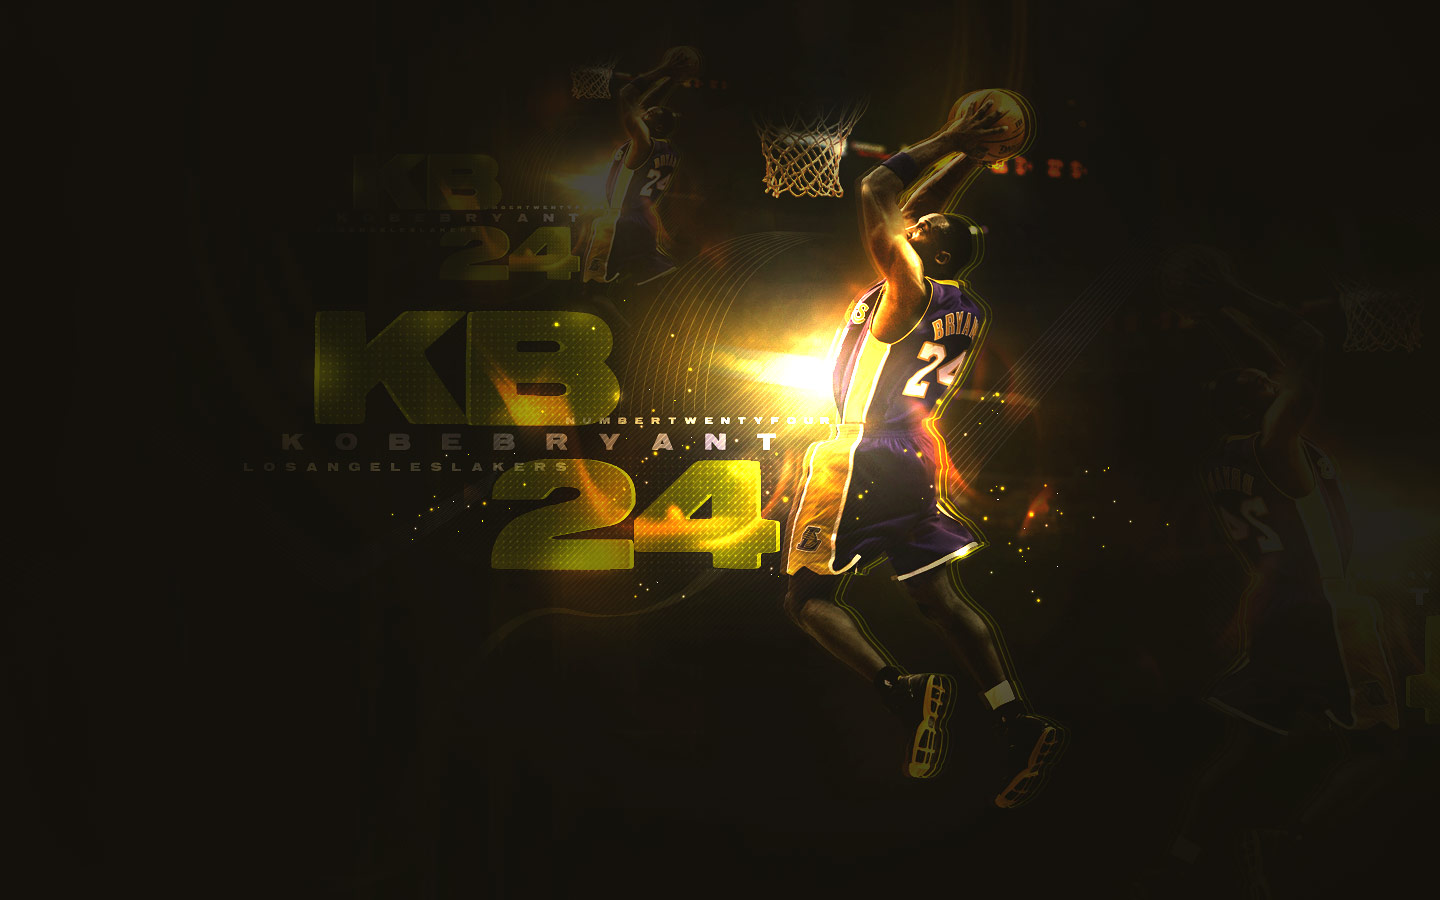 The third wallpaper of Kobe i'm adding today is widescreen one it's 